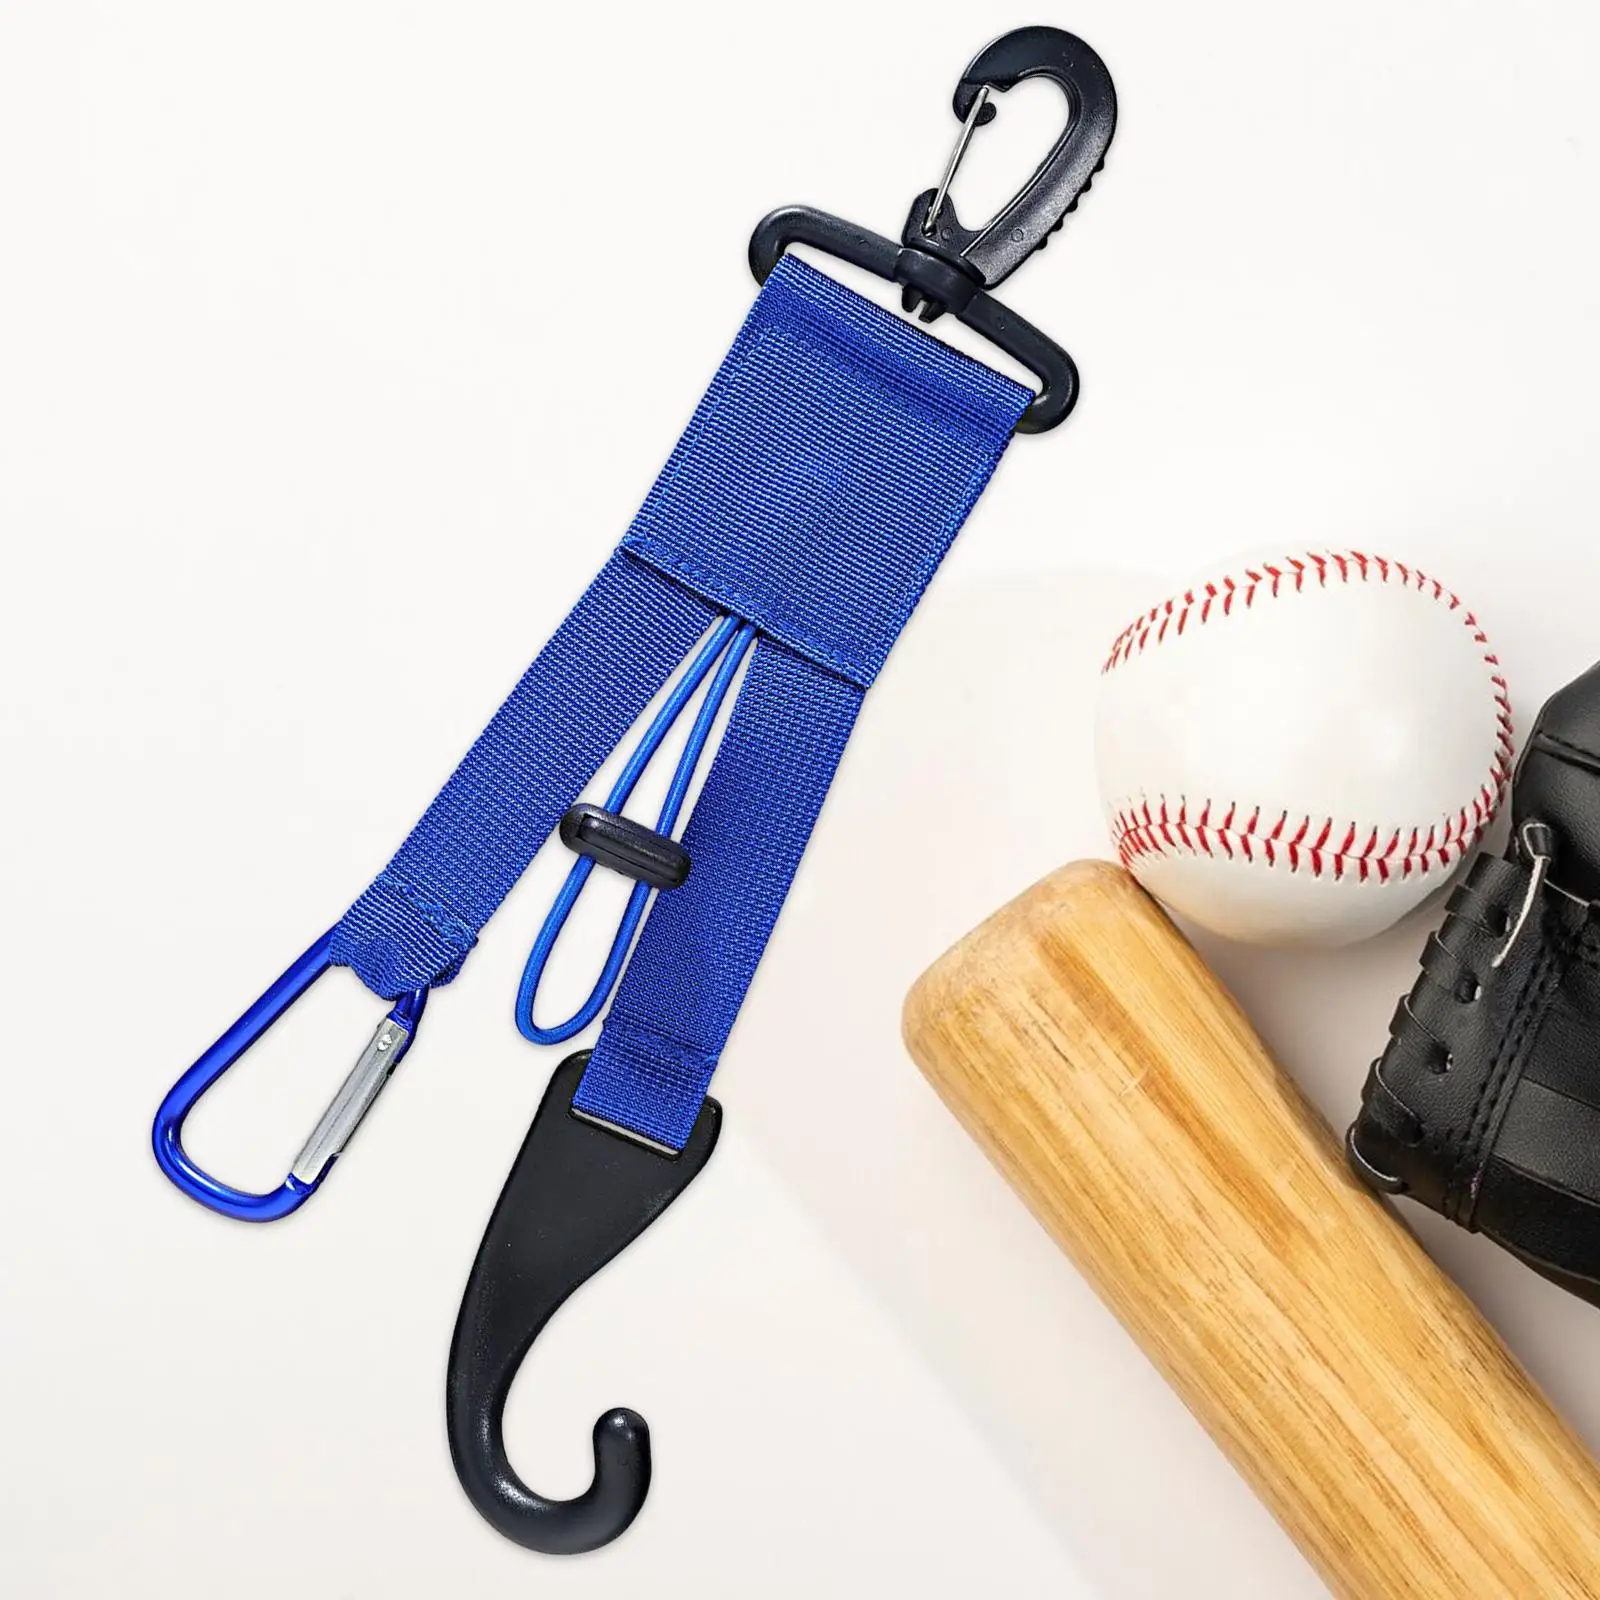 Baseball Softball Gear Hanger Fits in Any Backpack Keeps Your Glove Hat Bats Clean Adjustable Bungee Loop Dugout Organizer